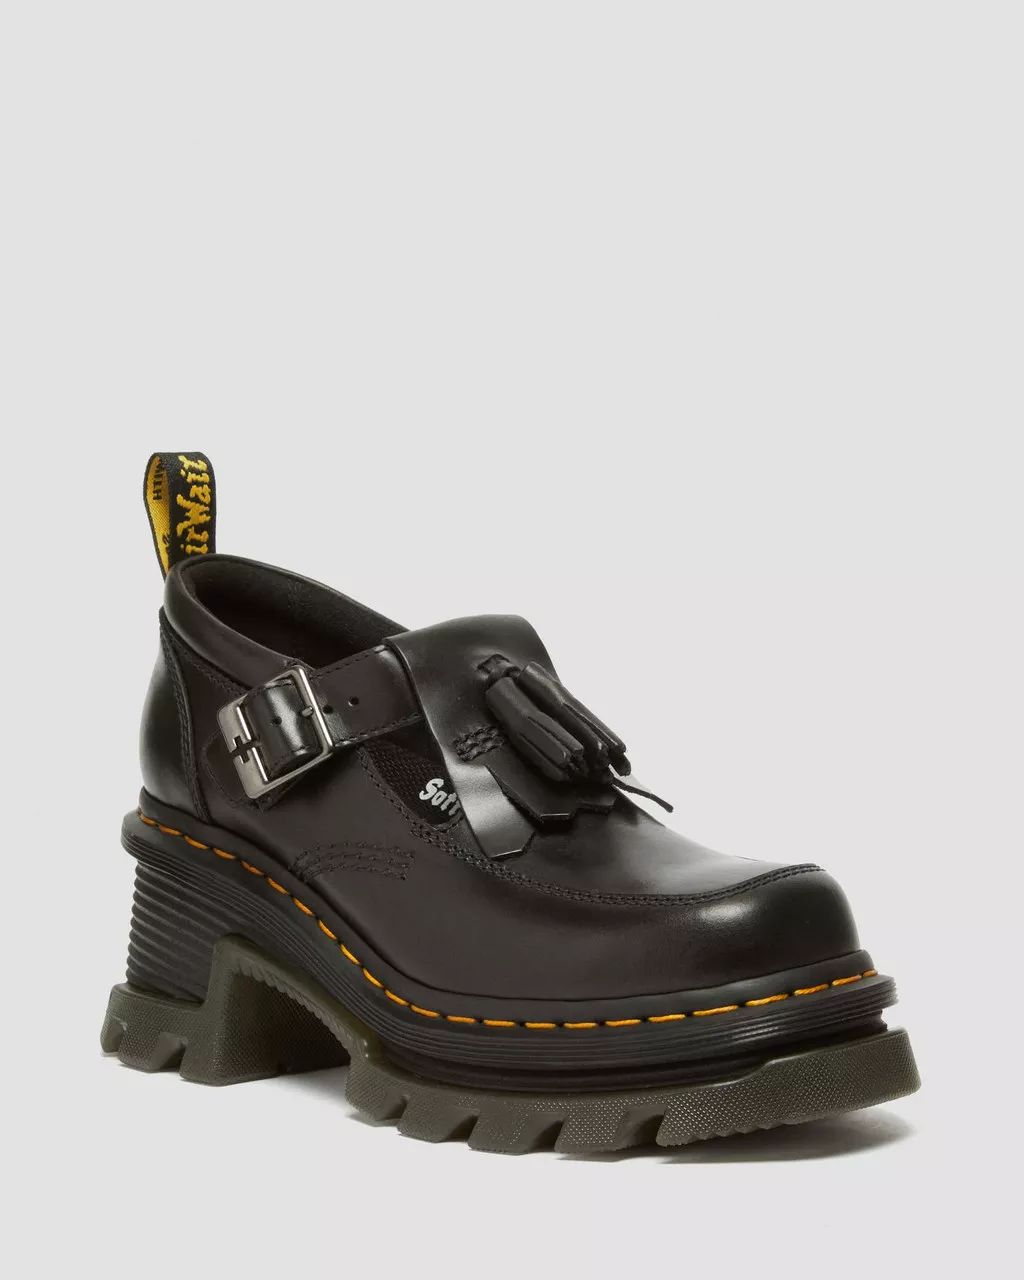 Corran Atlas Leather Mary Jane Heeled Shoes | Dr. Martens